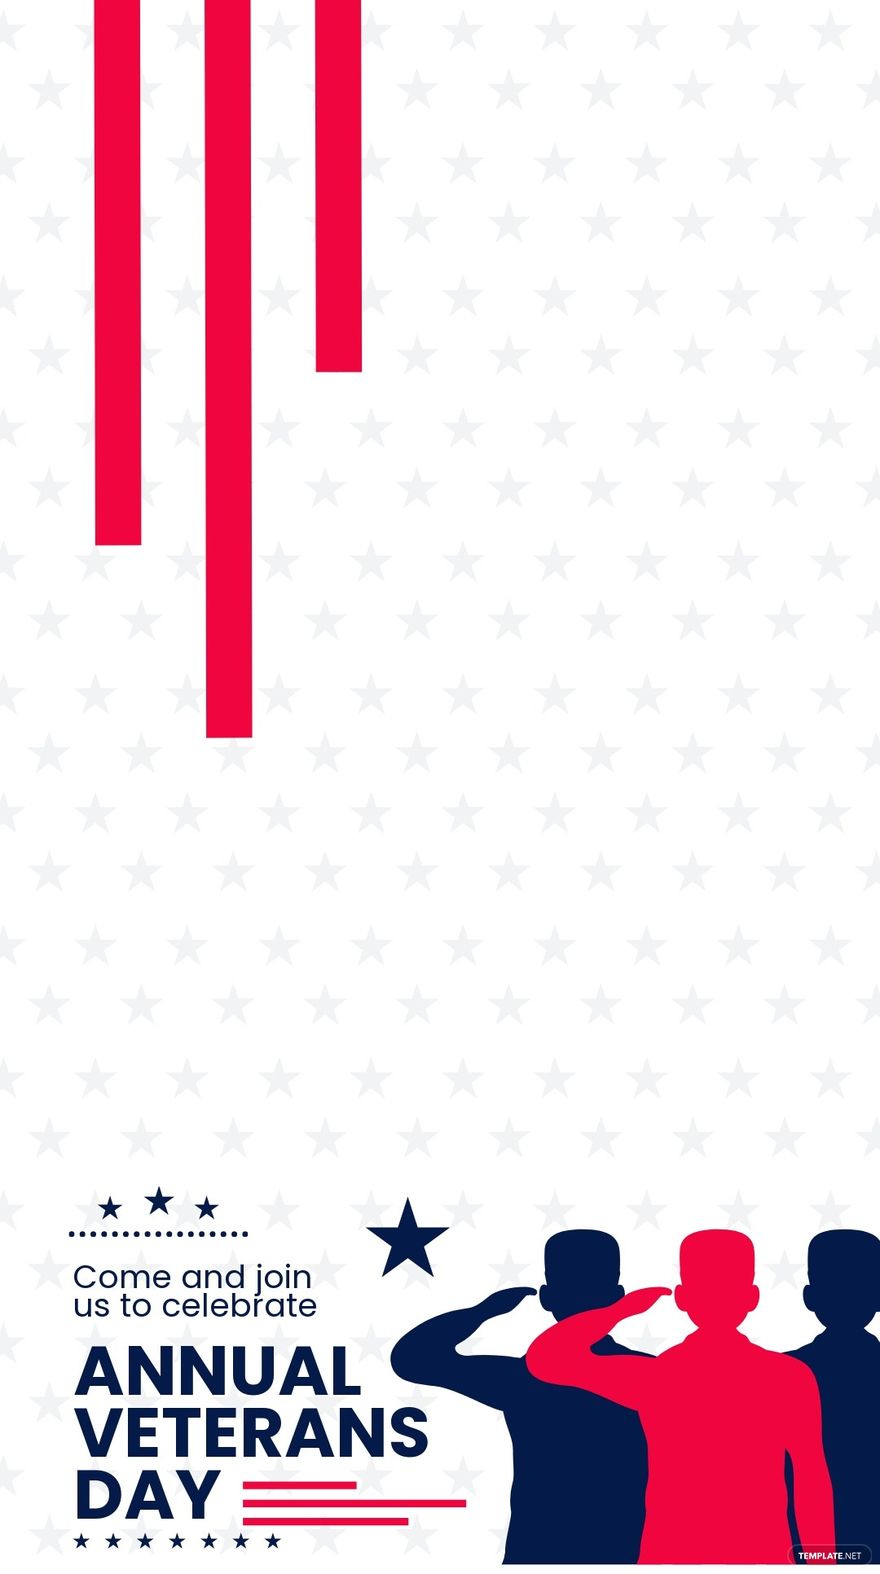 Veterans Day Event Snapchat Geofilter Template